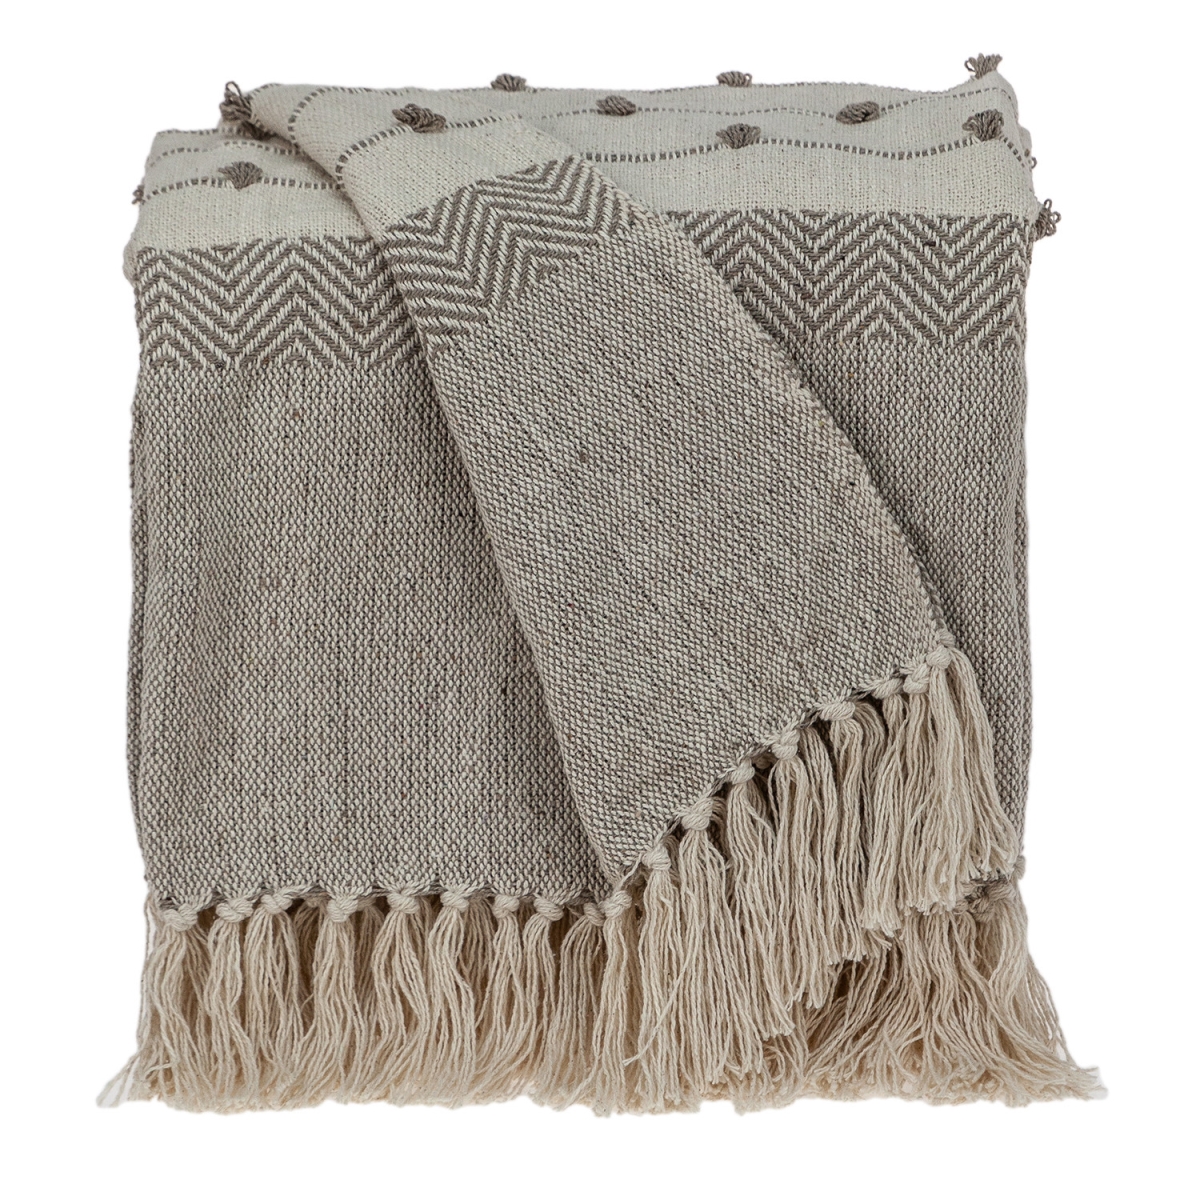 Picture of HomeRoots 476223 Tufted Beige Fringed Woven Handloom Throw